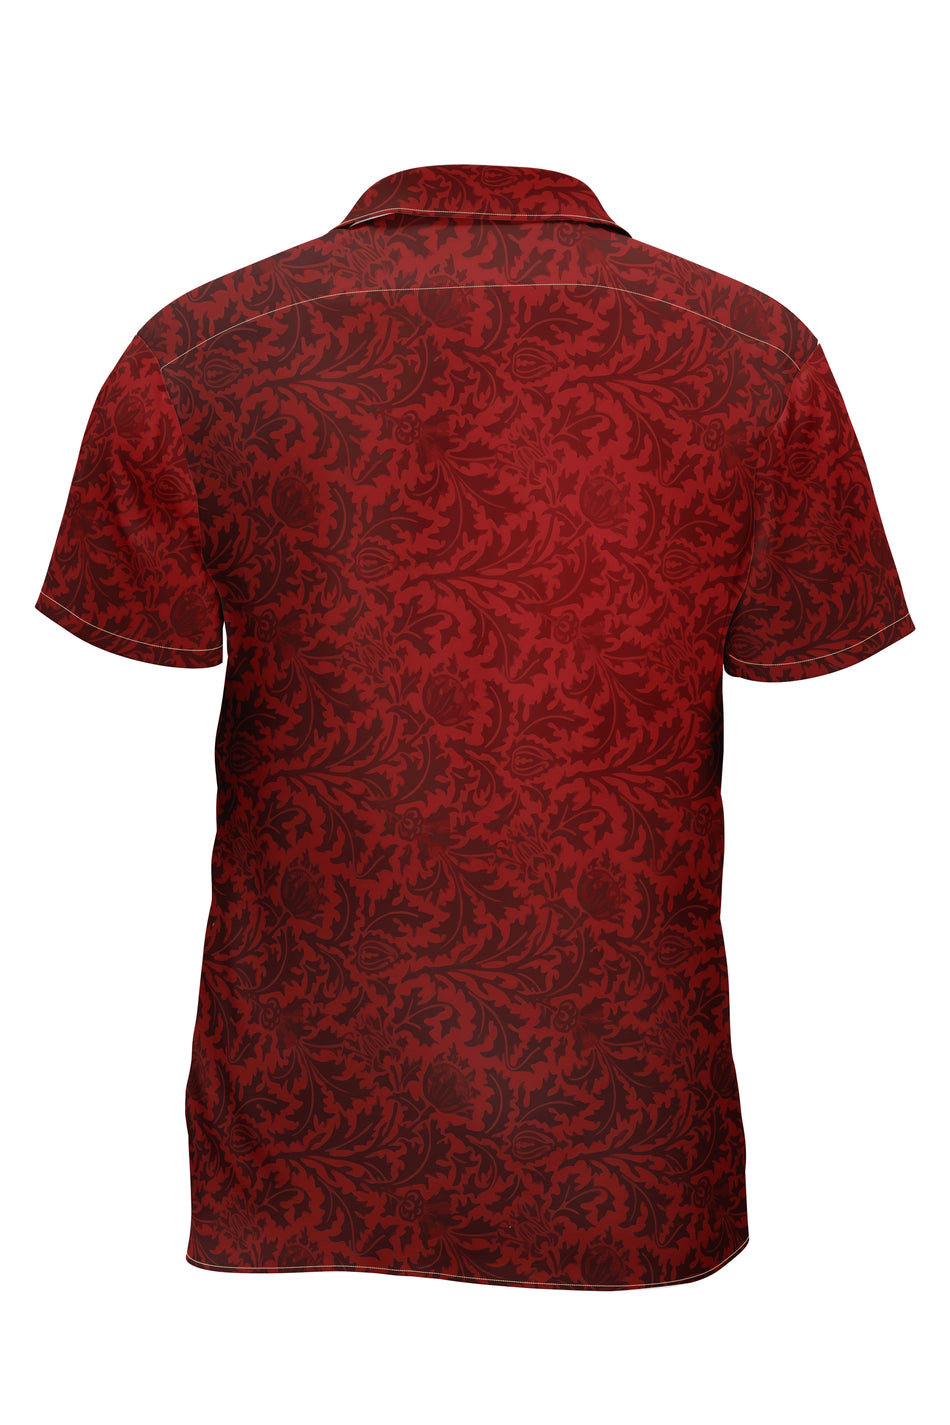 AOHS - RED VINTAGE SHIRT